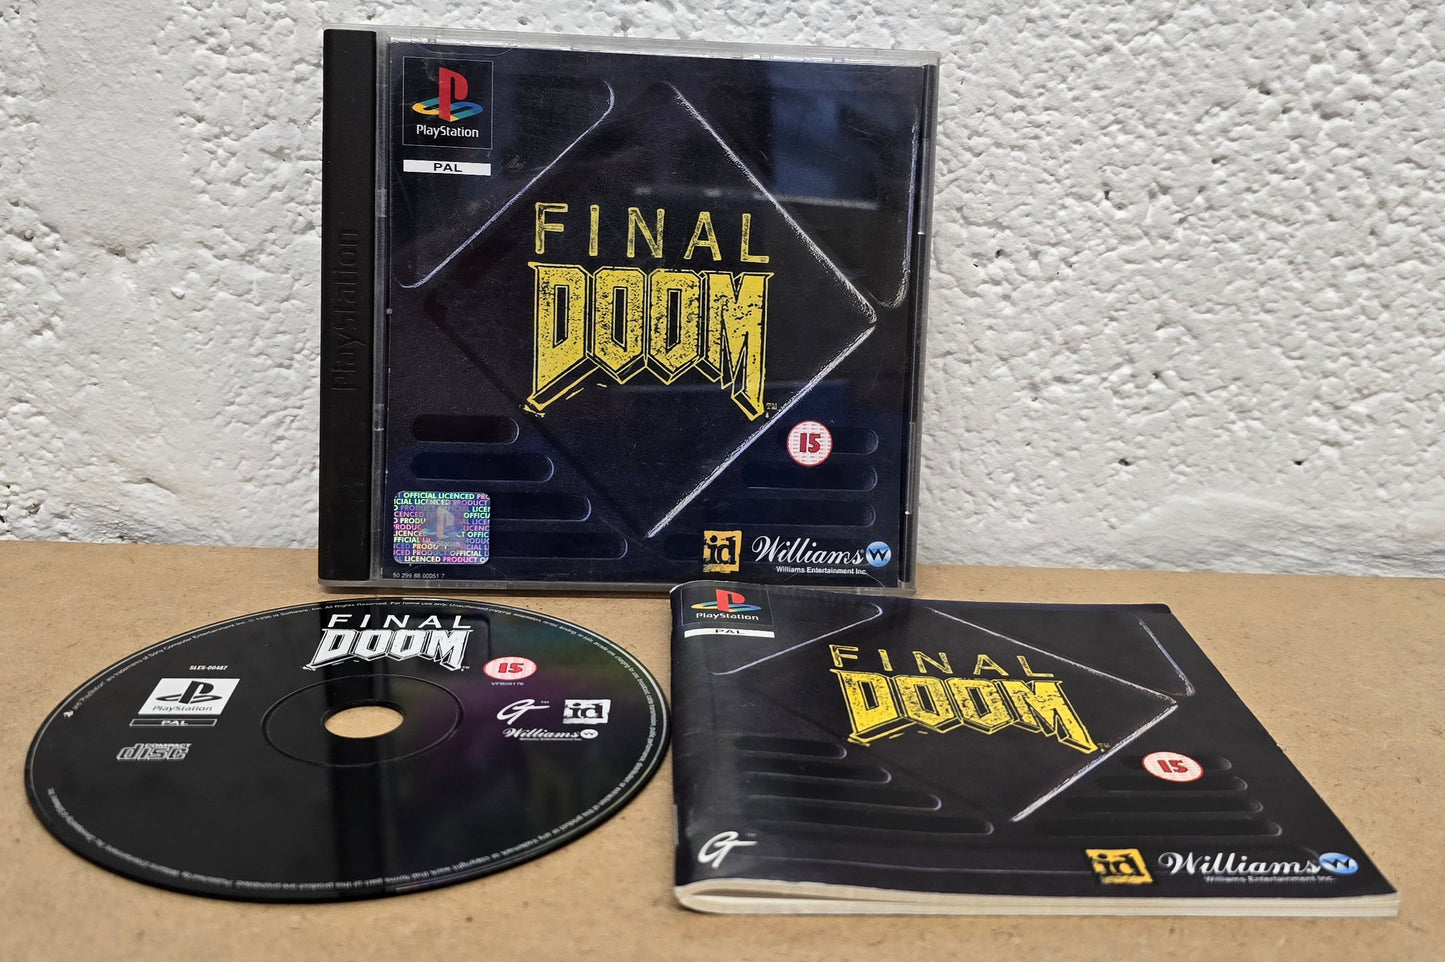 Final Doom Sony Playstation 1 (PS1) Game